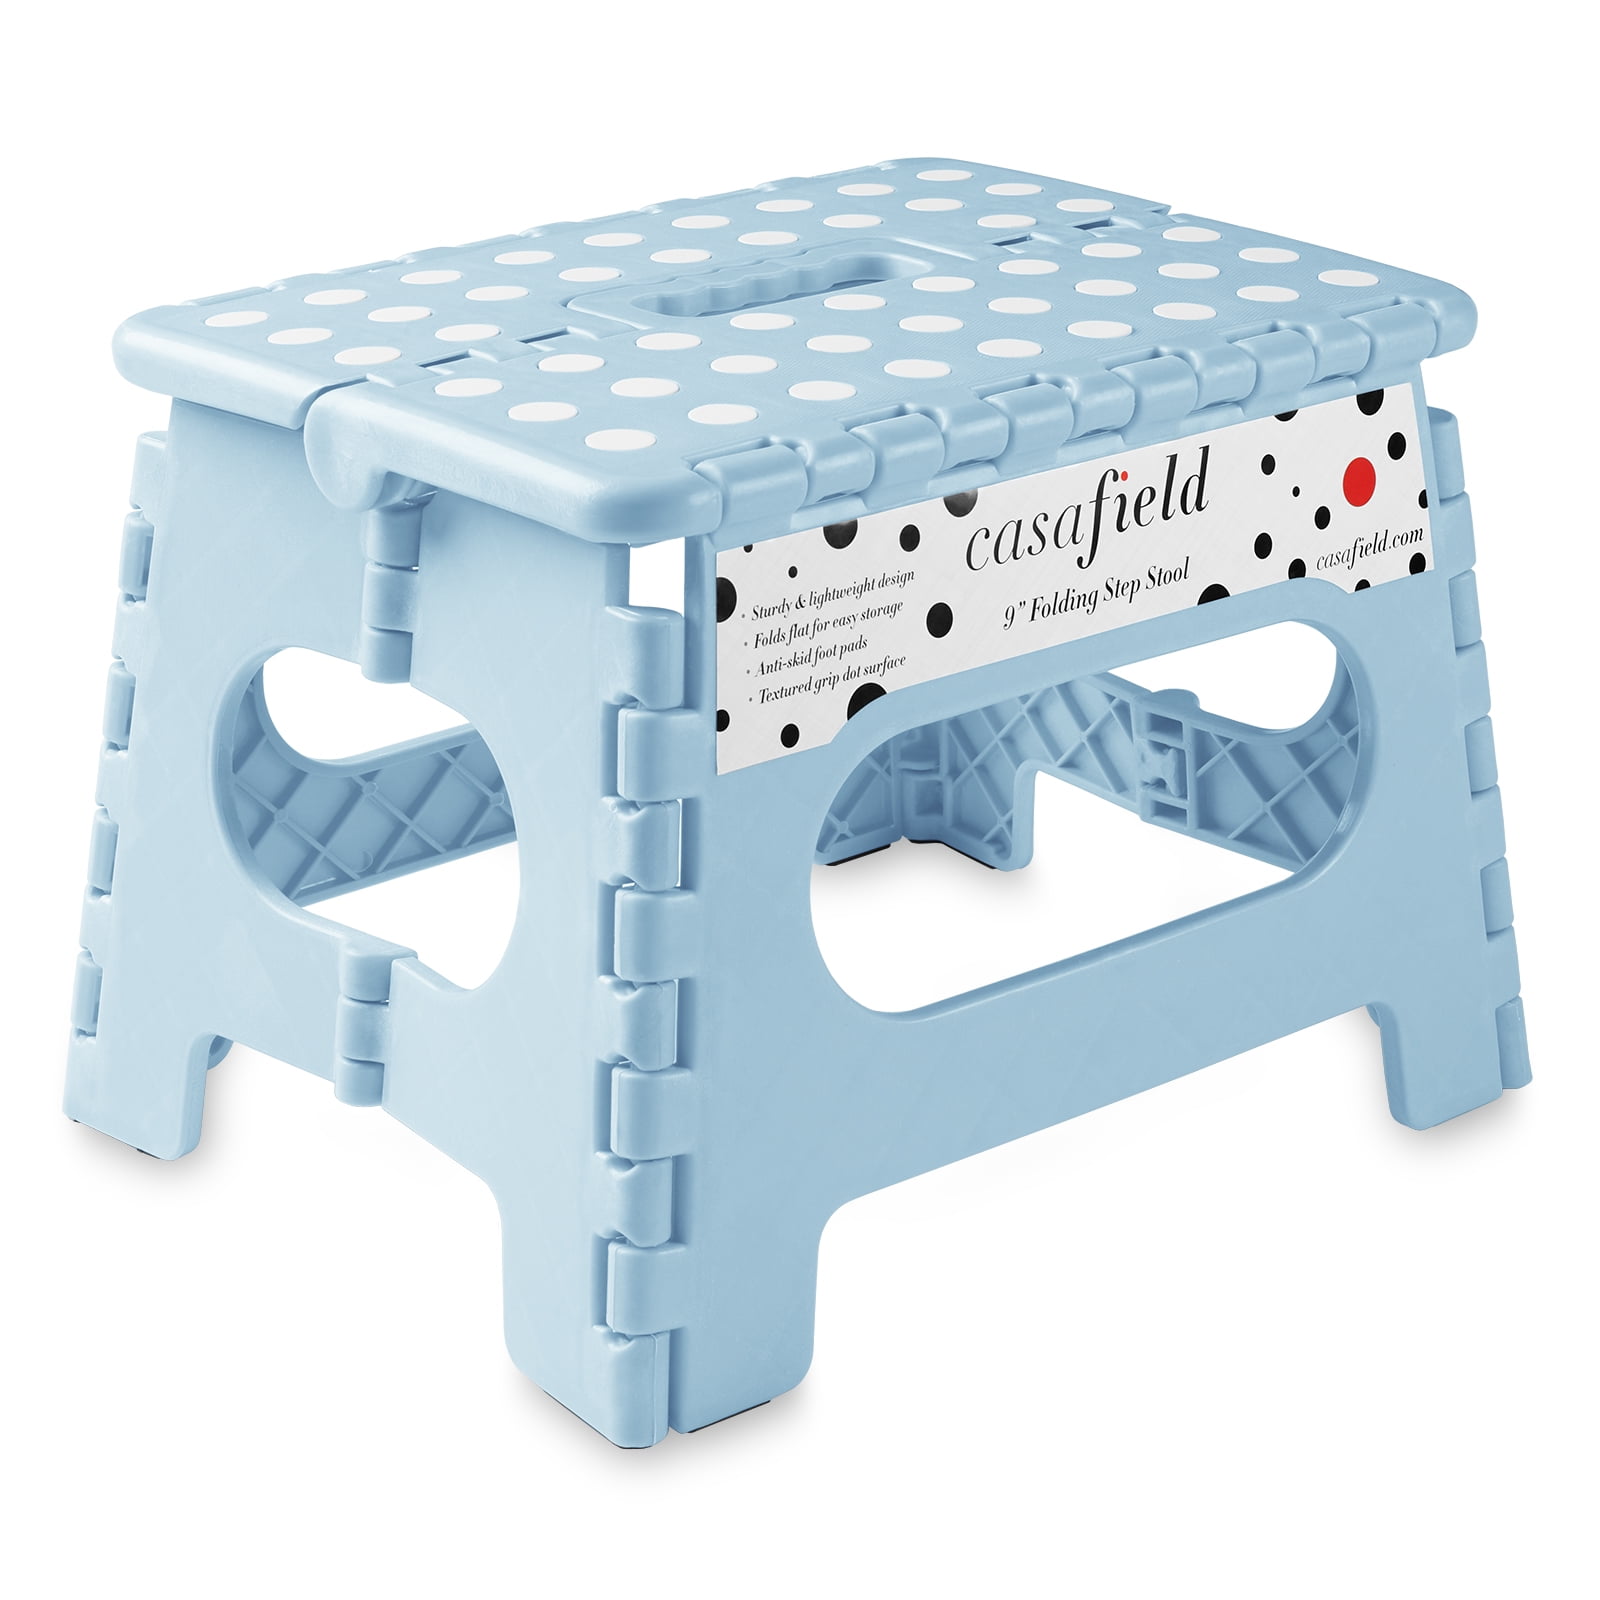 Dyforce Step Folding Step Stool Lightweight Plastic Step Stool,9 inch Foldable Step Stool for Kids & Adults,Non Slip Folding Stools For Kitchen Bathroom Bedroom 2020 Plastic Stepping Stool 